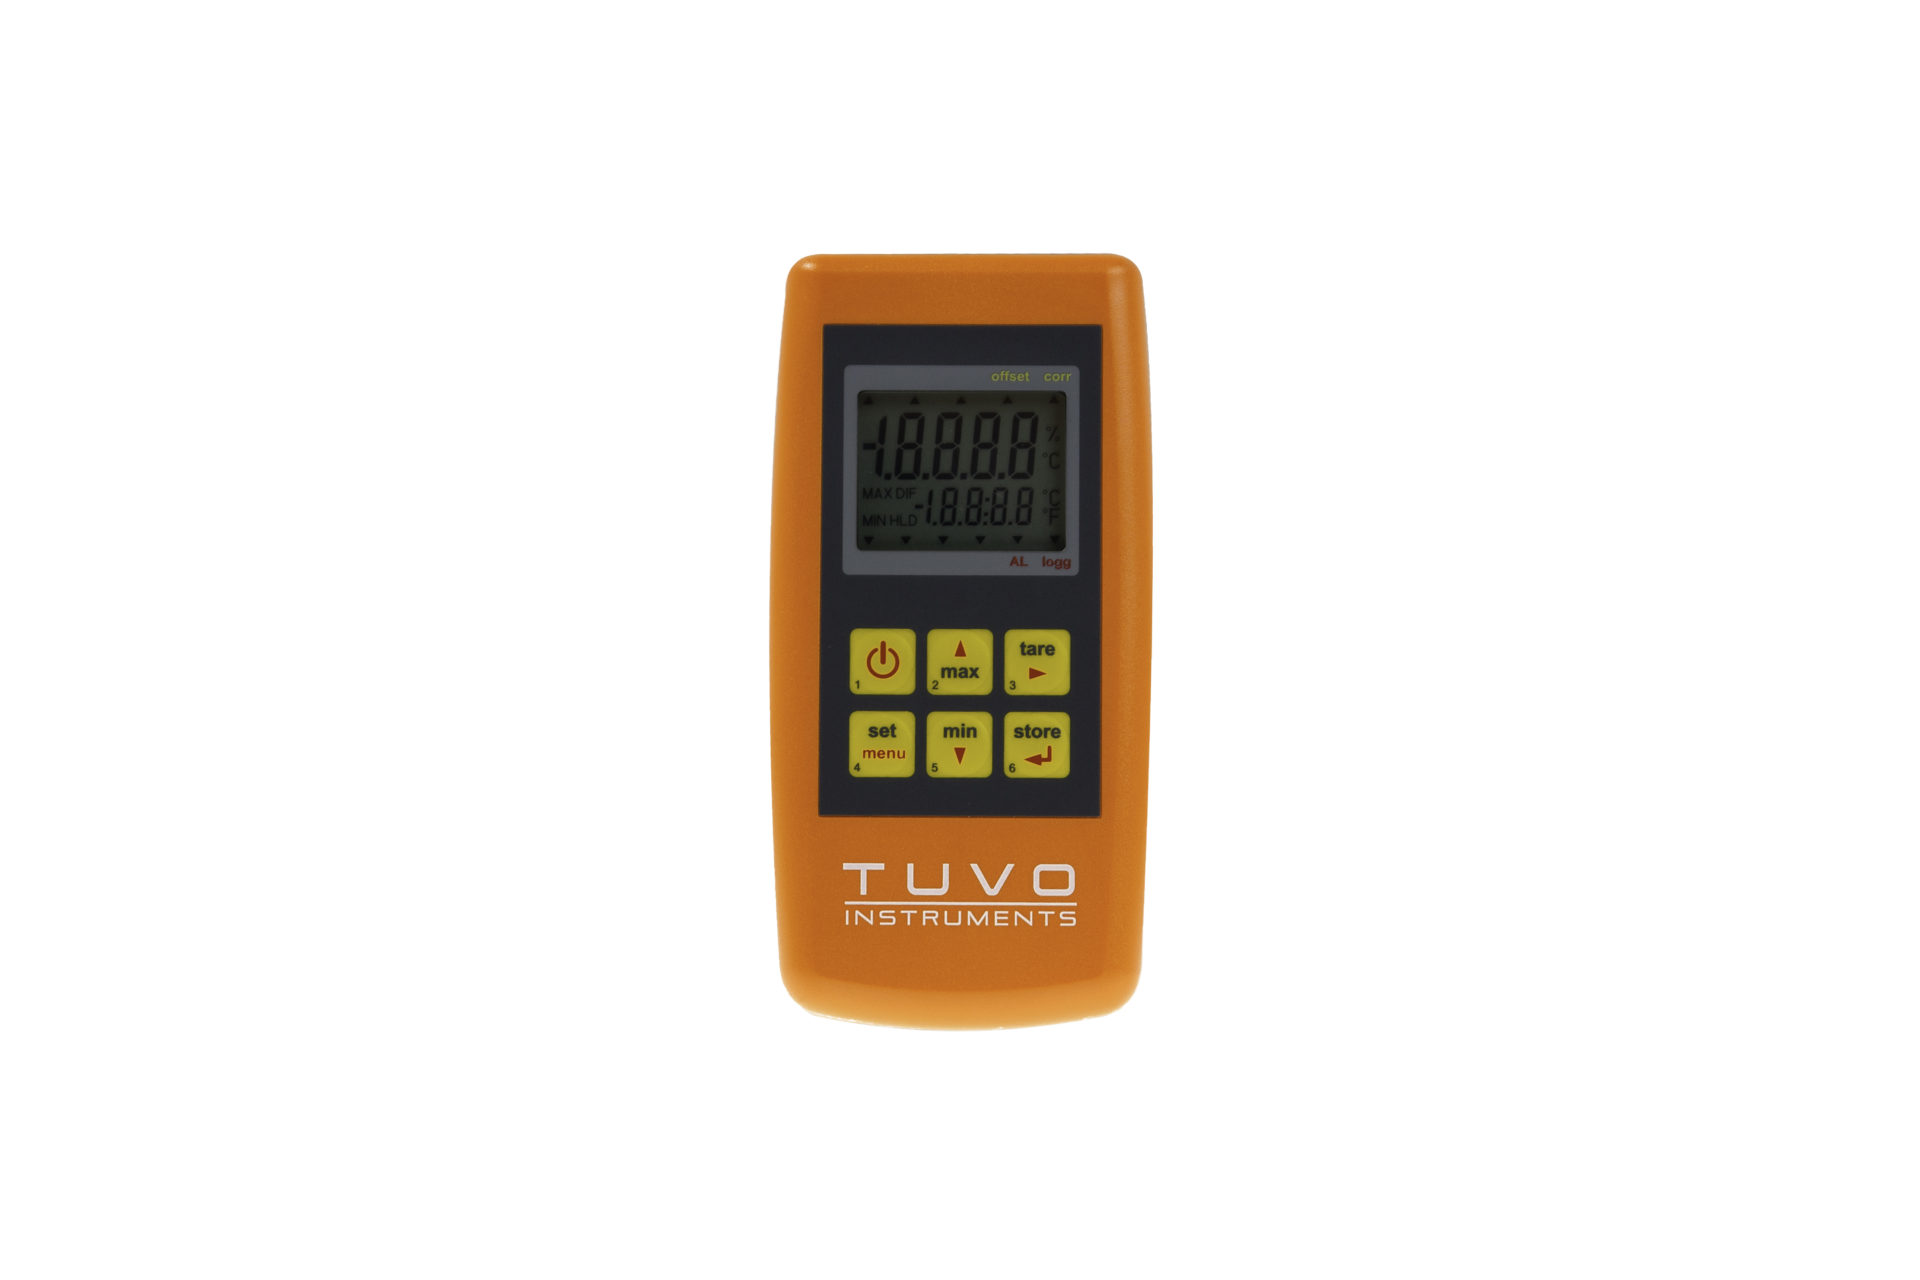 https://tuvo-instruments.com/wp-content/uploads/2020/07/TUVO_Instruments_GMH_3710_Presision_Thermometer.jpg